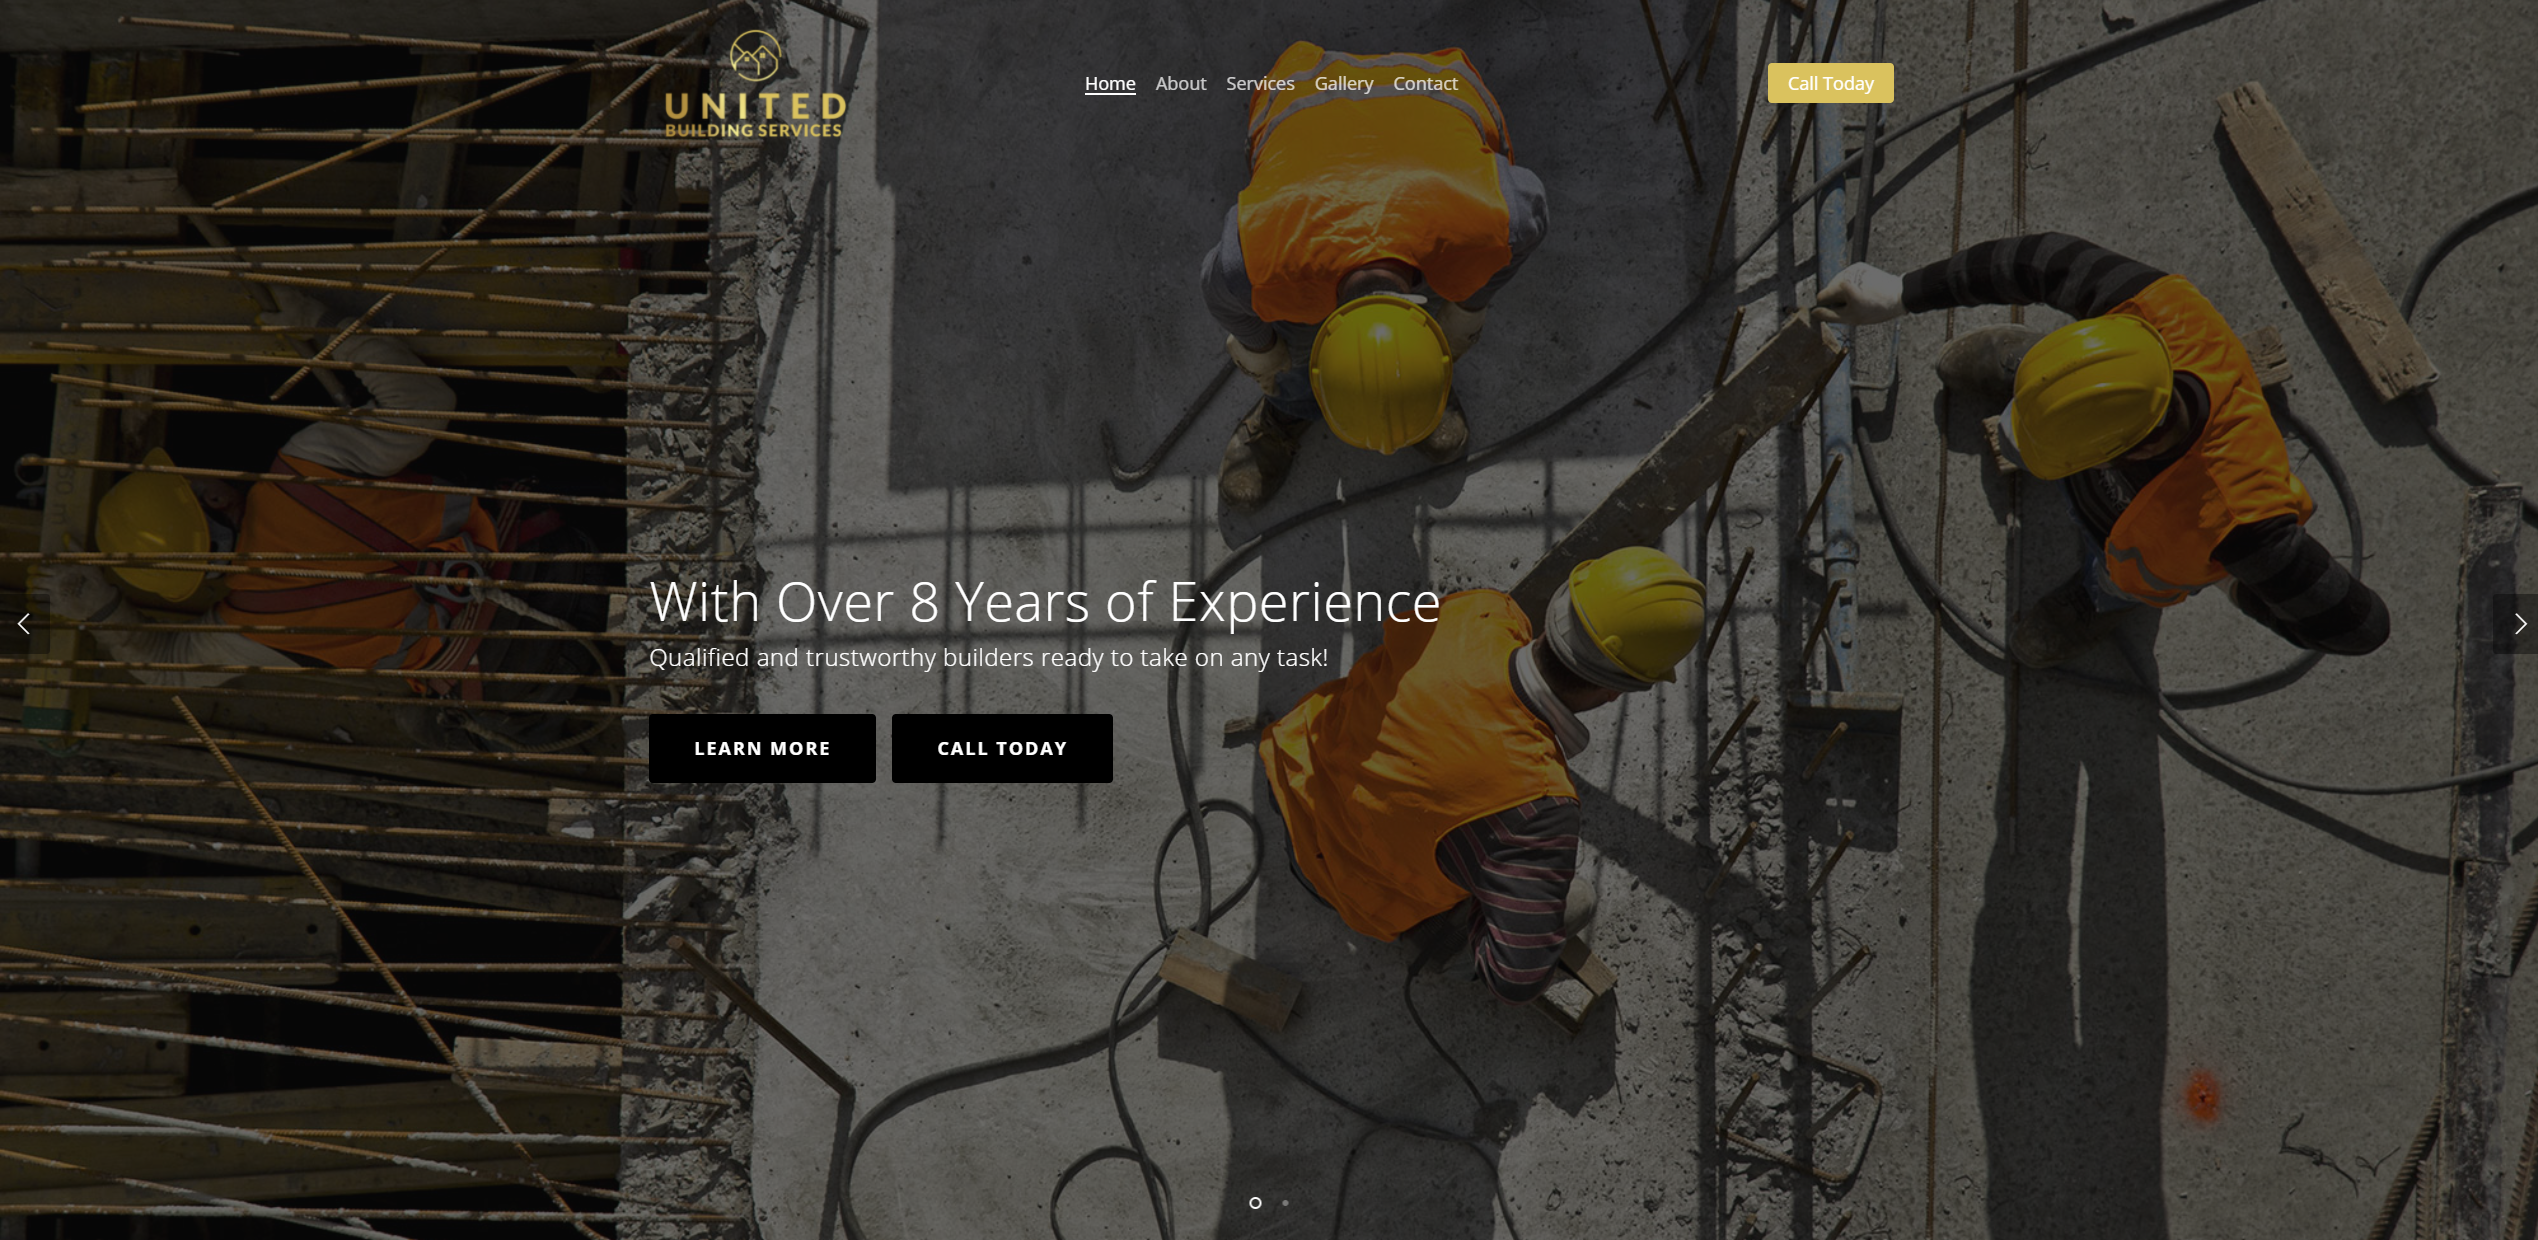 United Building Services